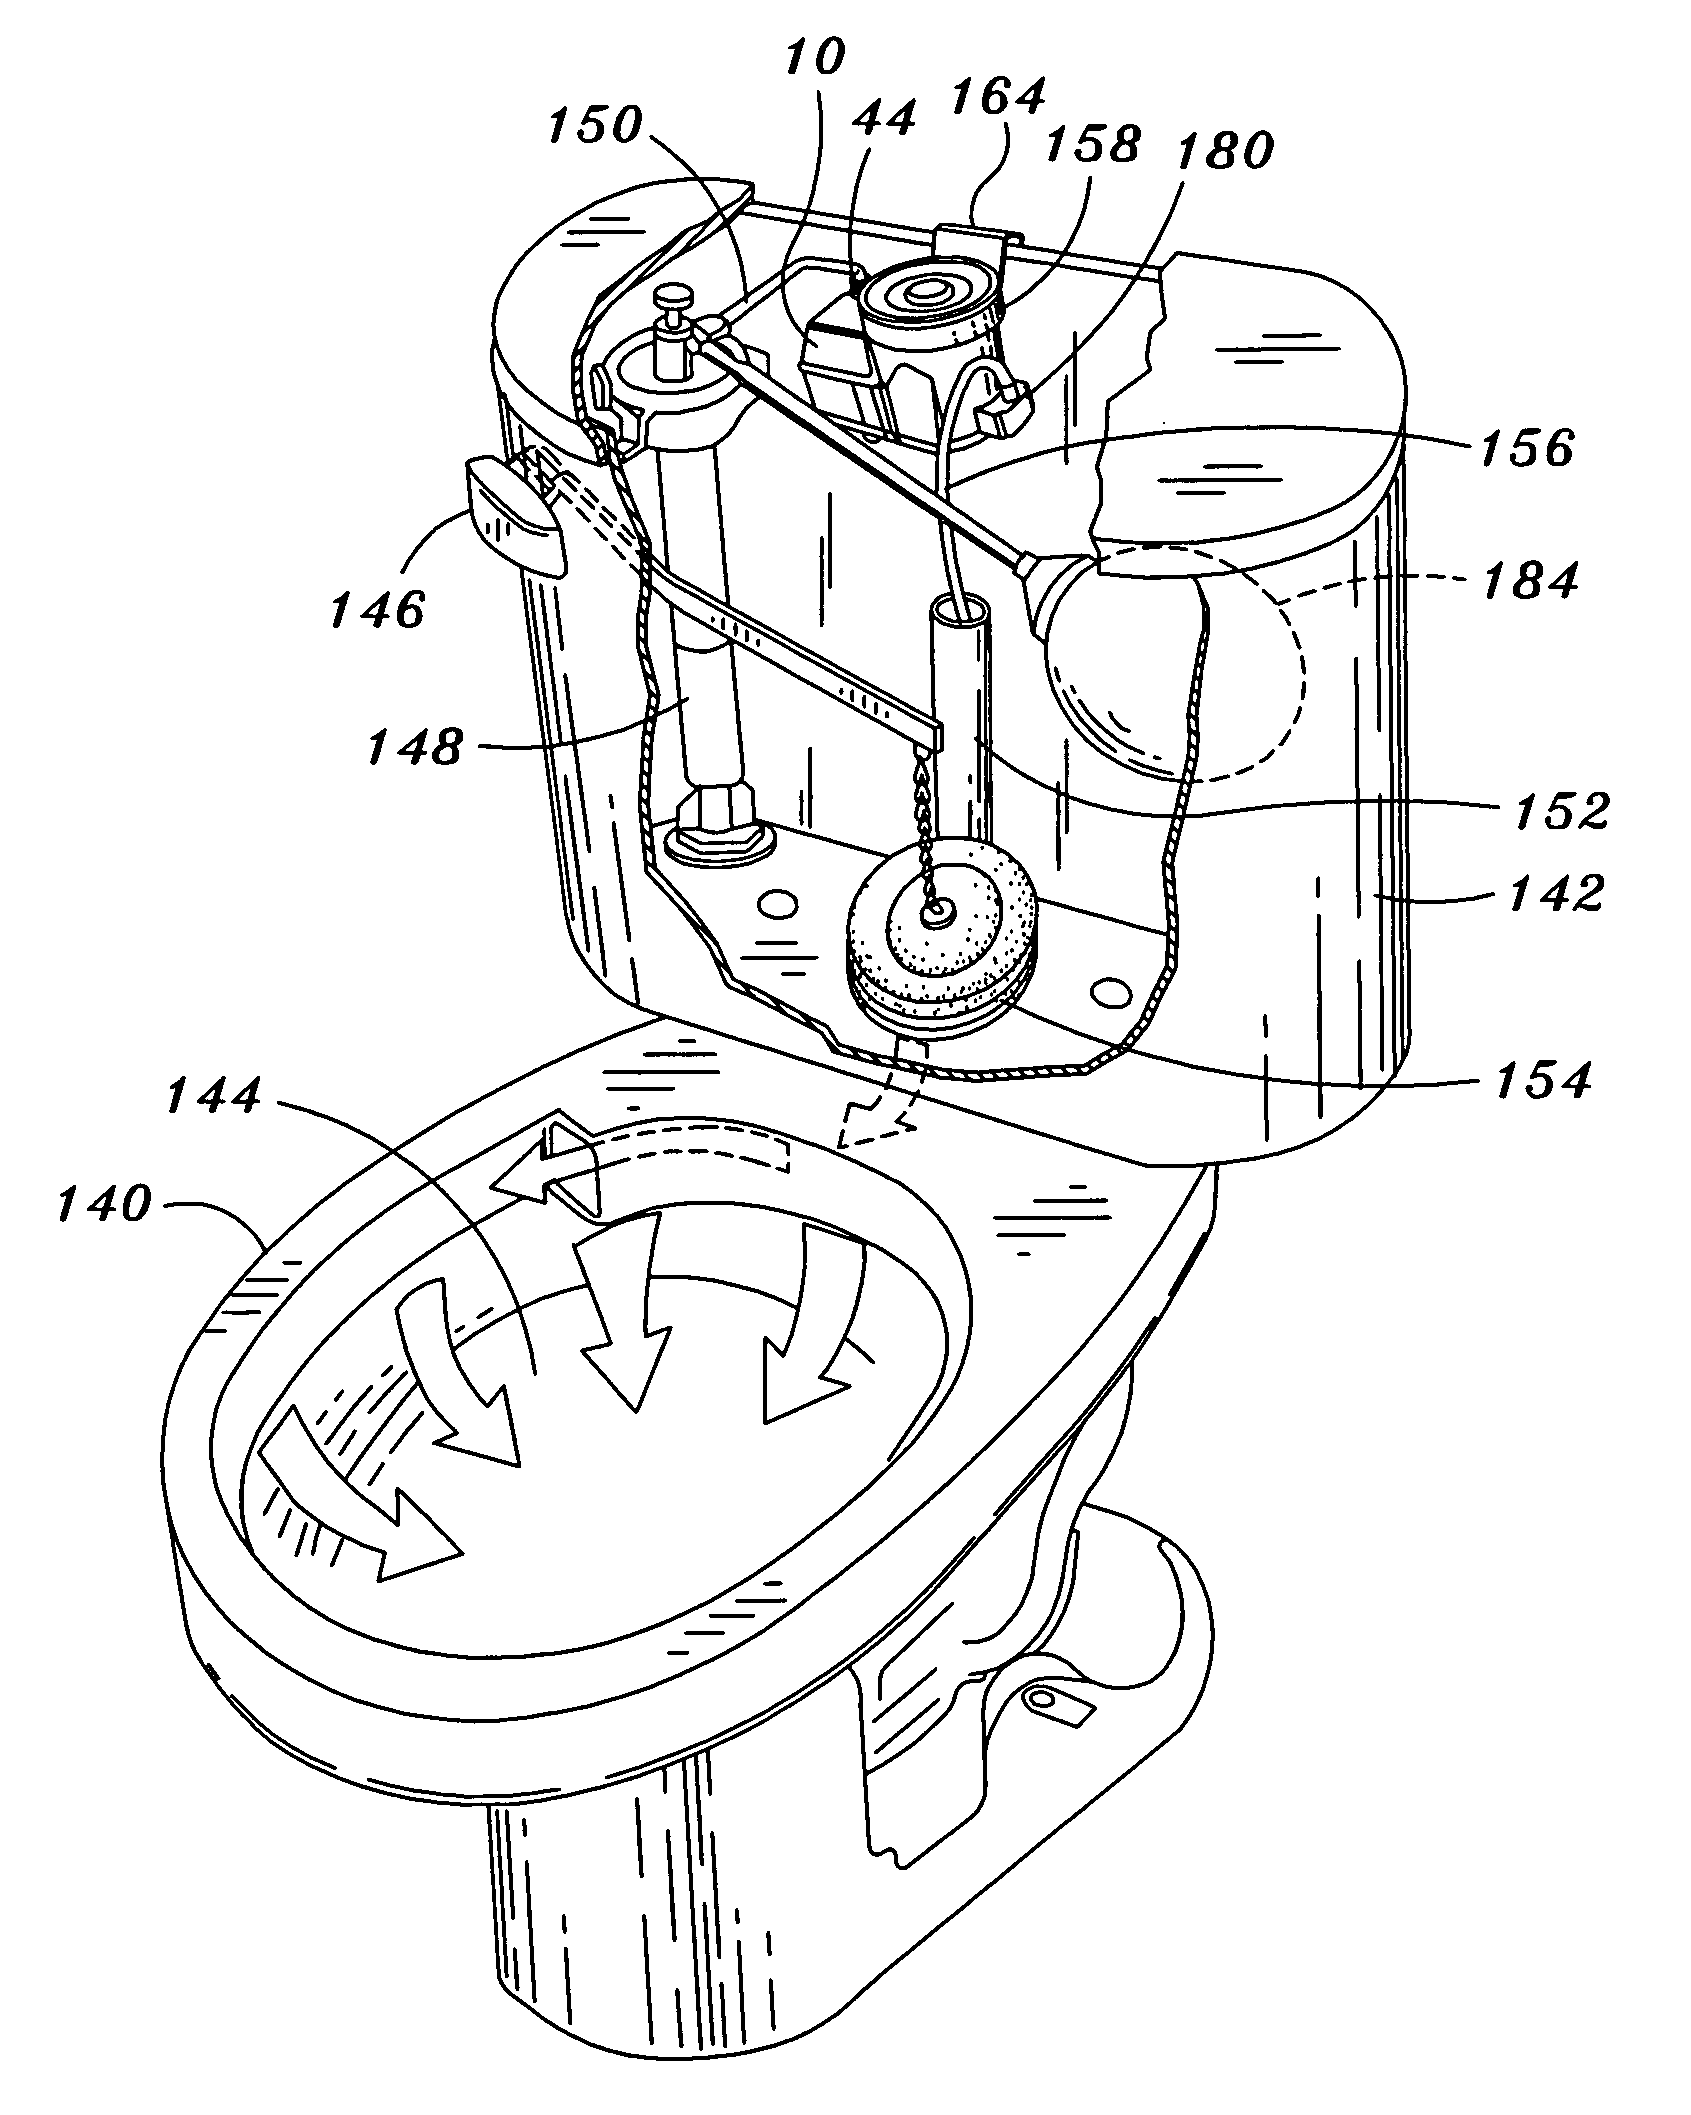 Automatic cleaning assembly for a toilet bowl